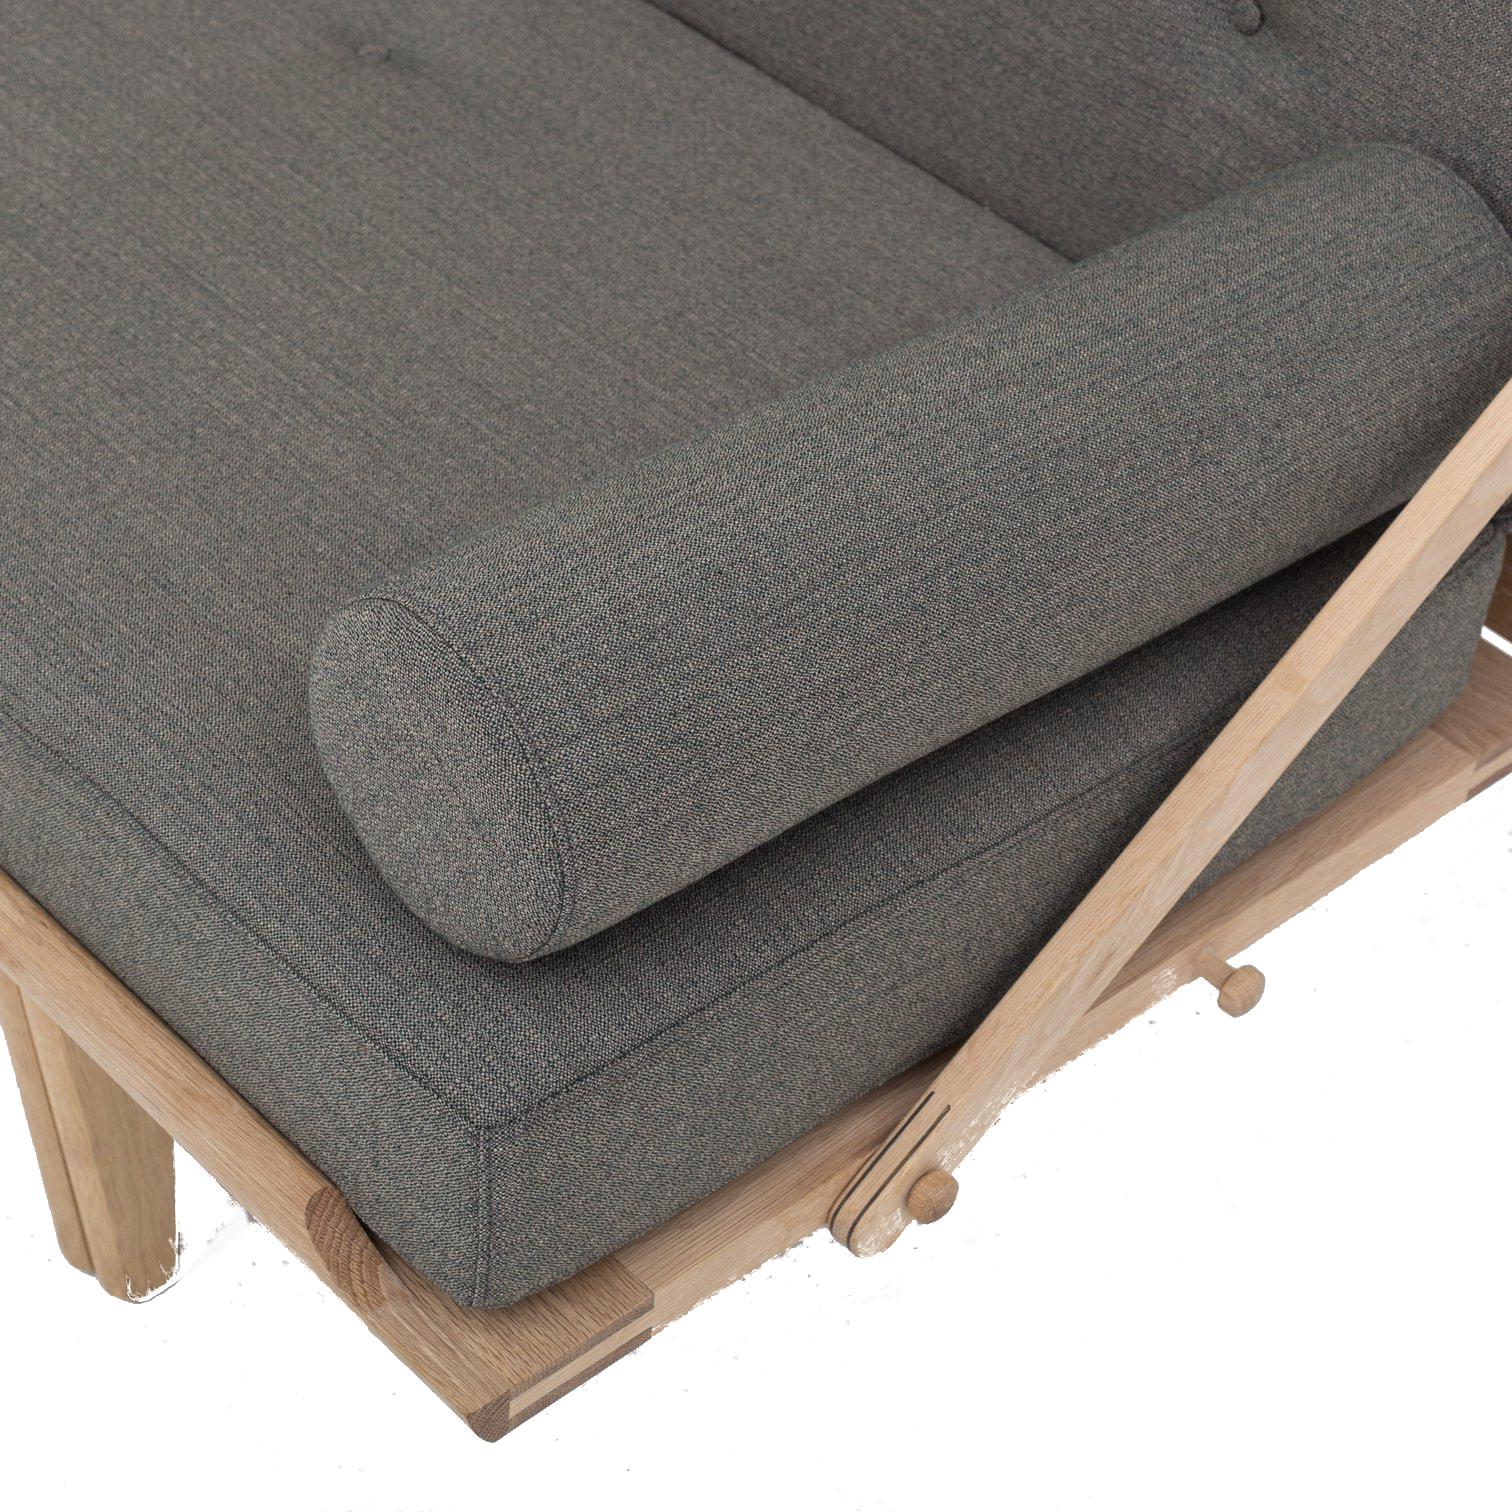 Klassik Studio PV Daybed Eiche Seife, Brown Foss 952